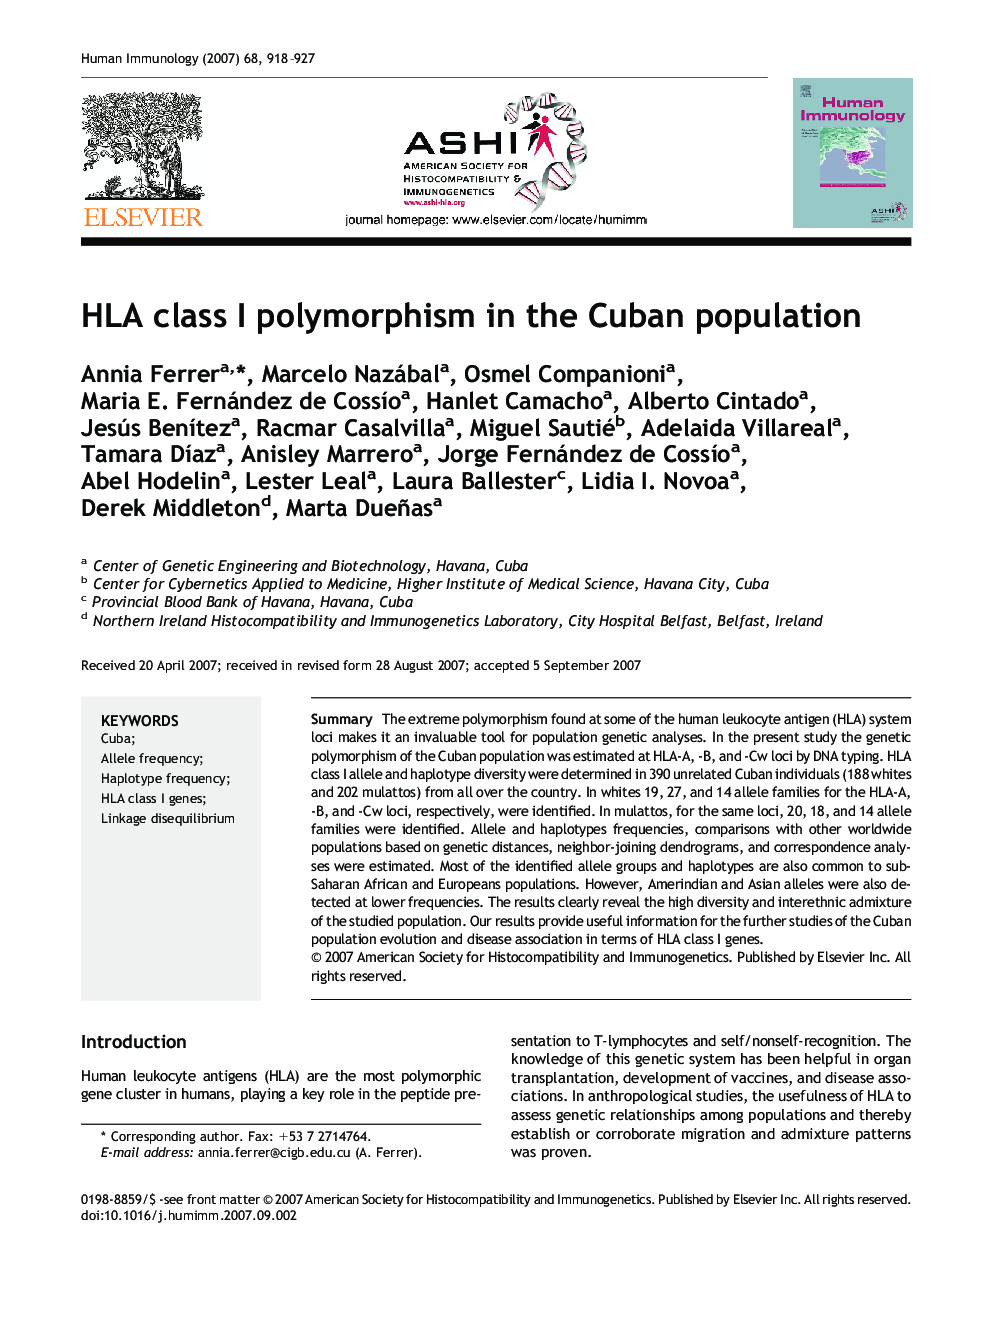 HLA class I polymorphism in the Cuban population